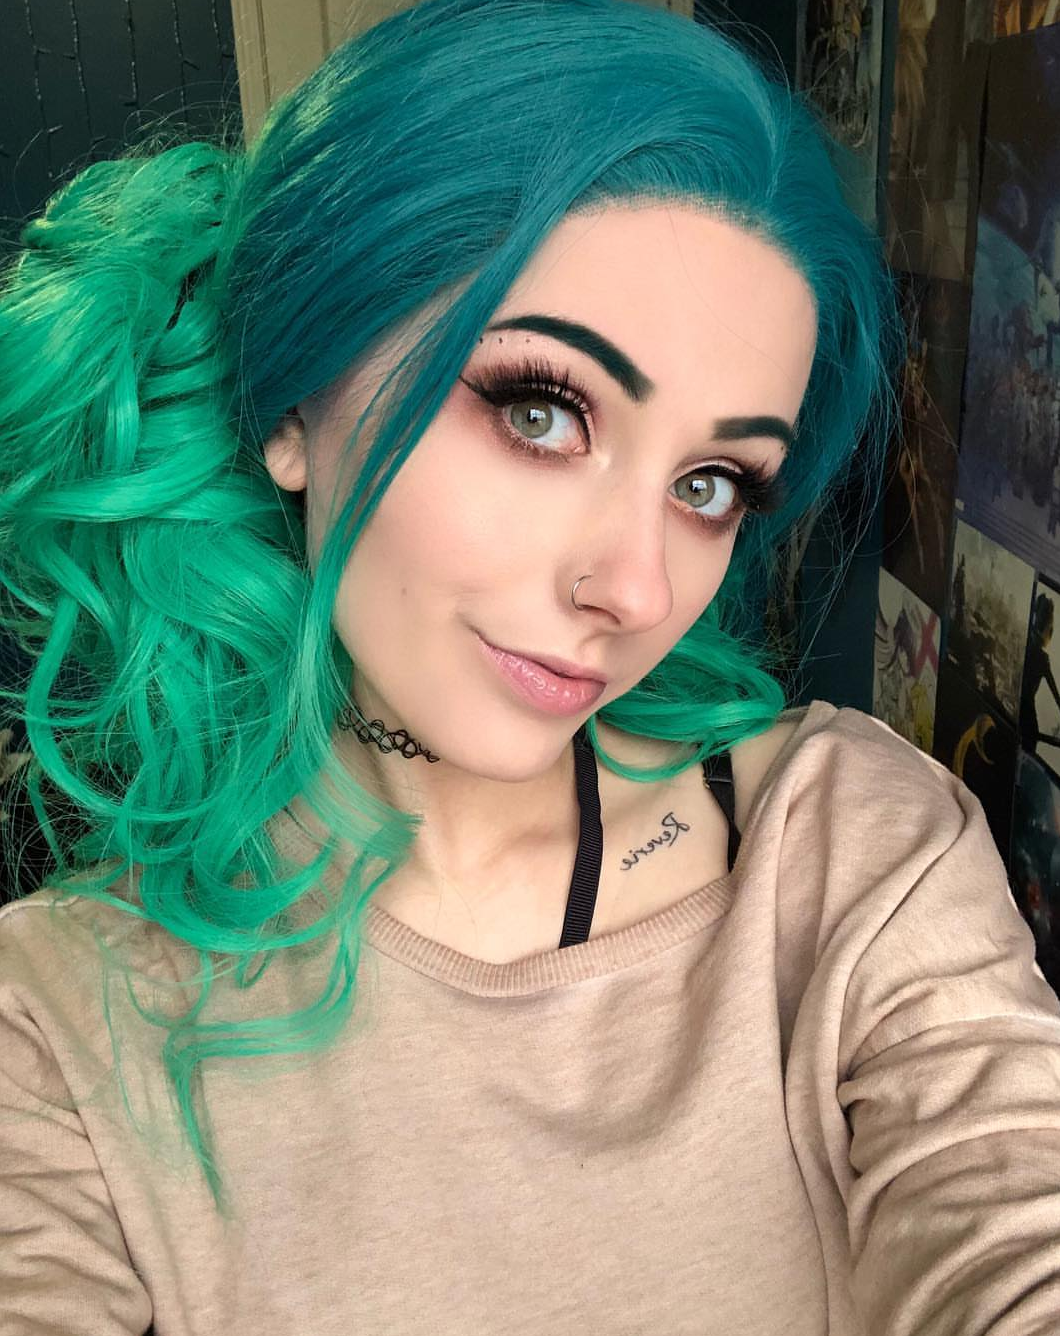 Rolyat with adorable green hair